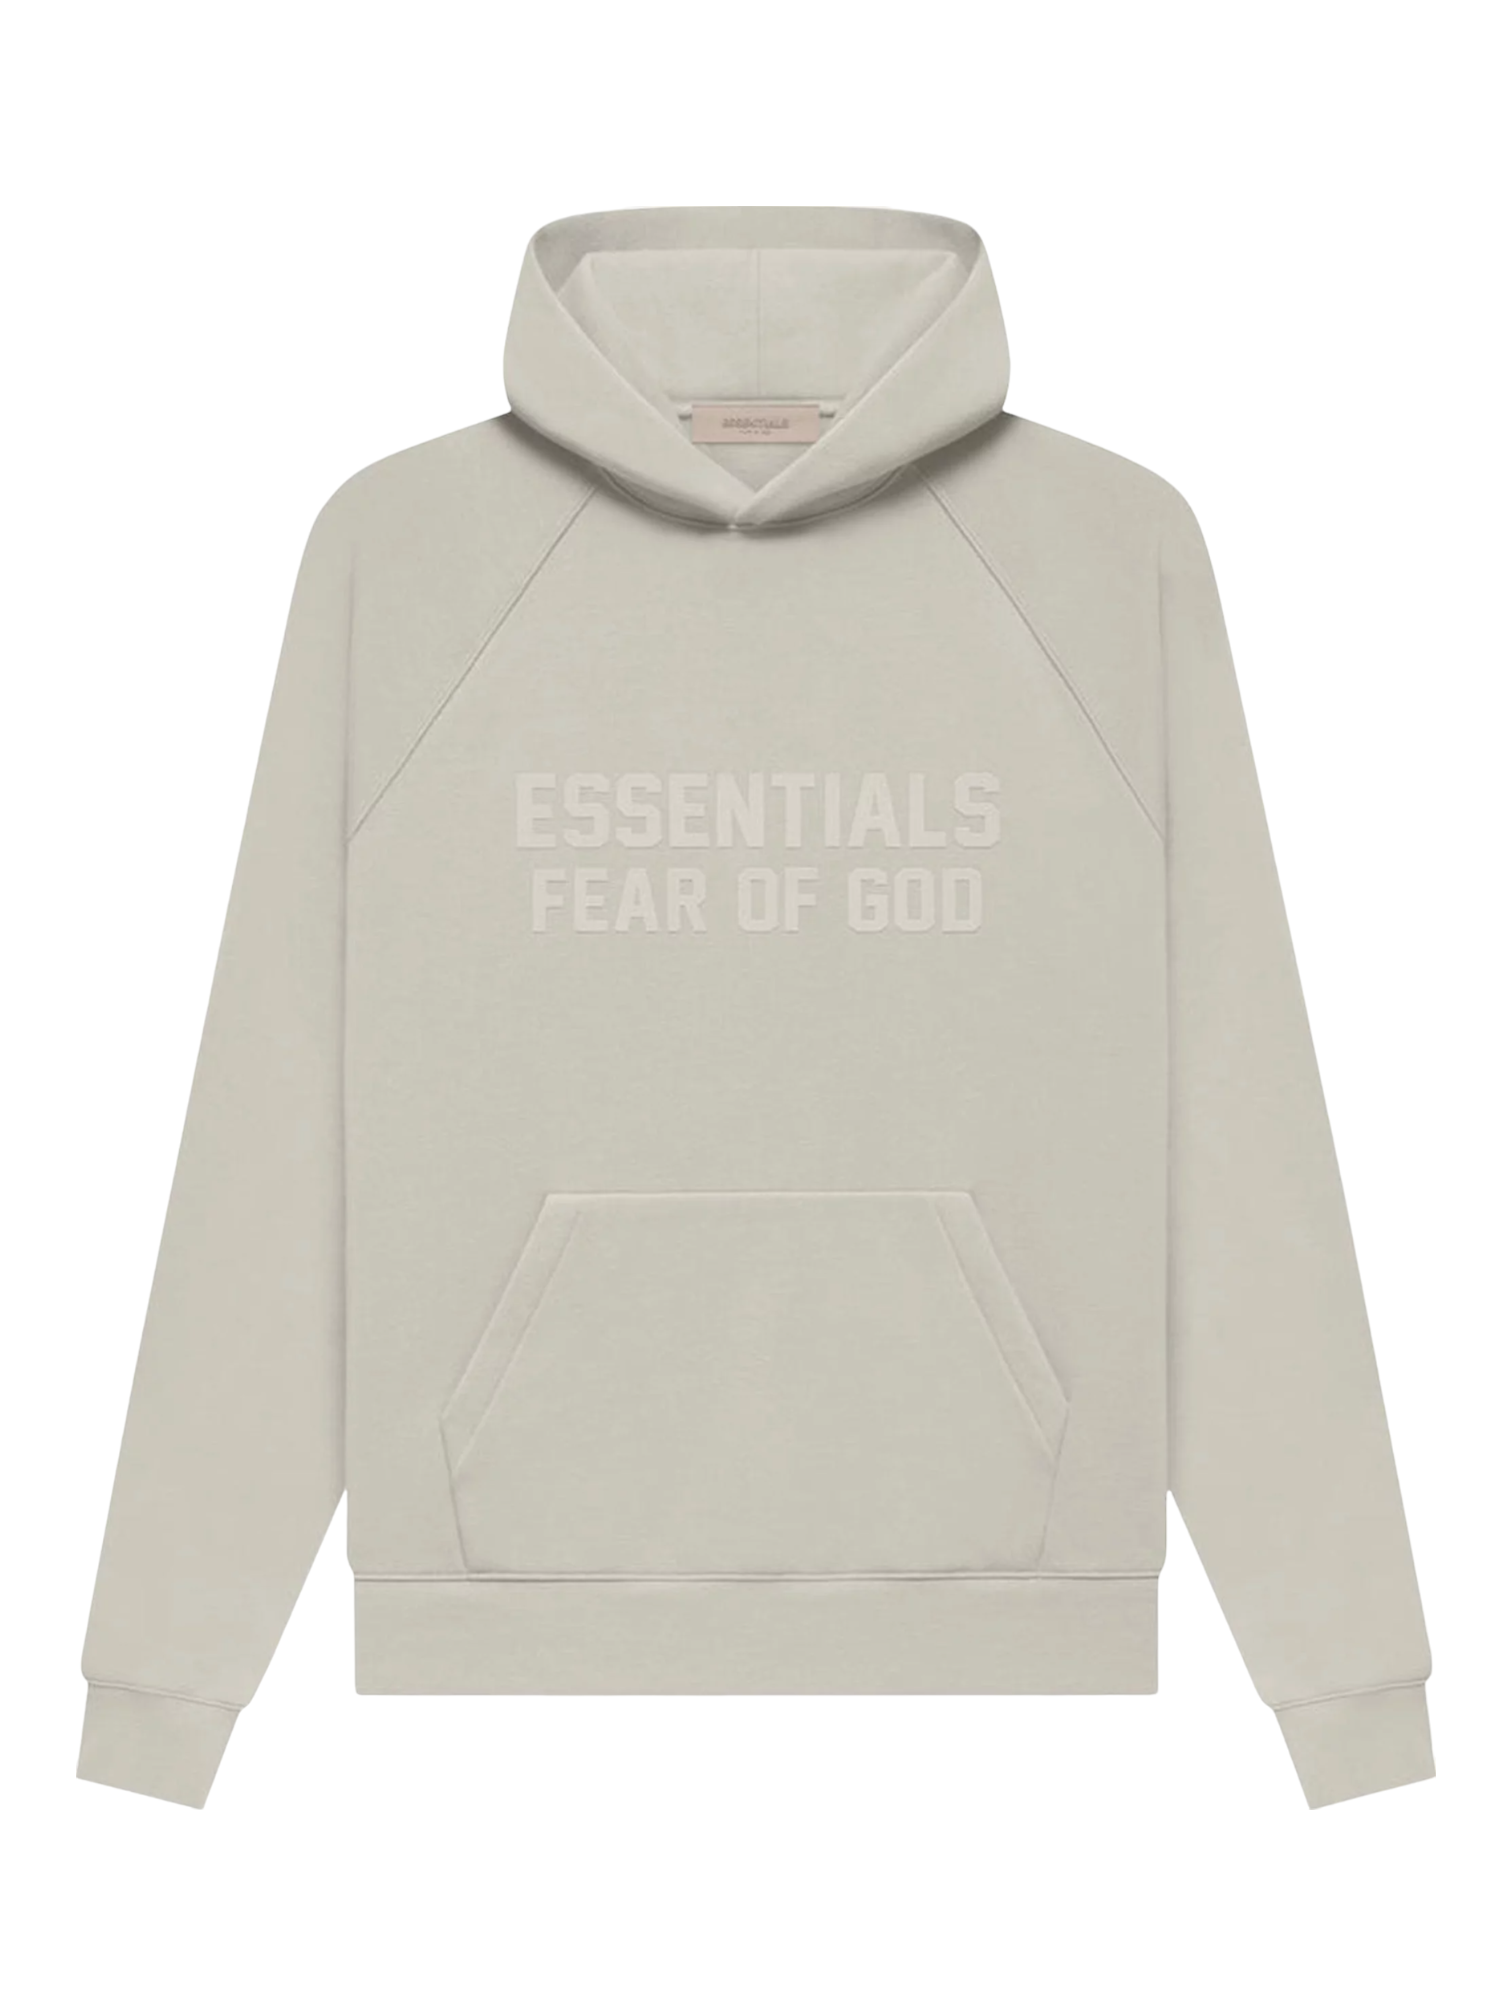 Essentials Fear of God Smoke Fleece Hoodie SS23 — Genuine Design Luxury Consignment for Men. New & Pre-Owned Clothing, Shoes, & Accessories. Calgary, Canada